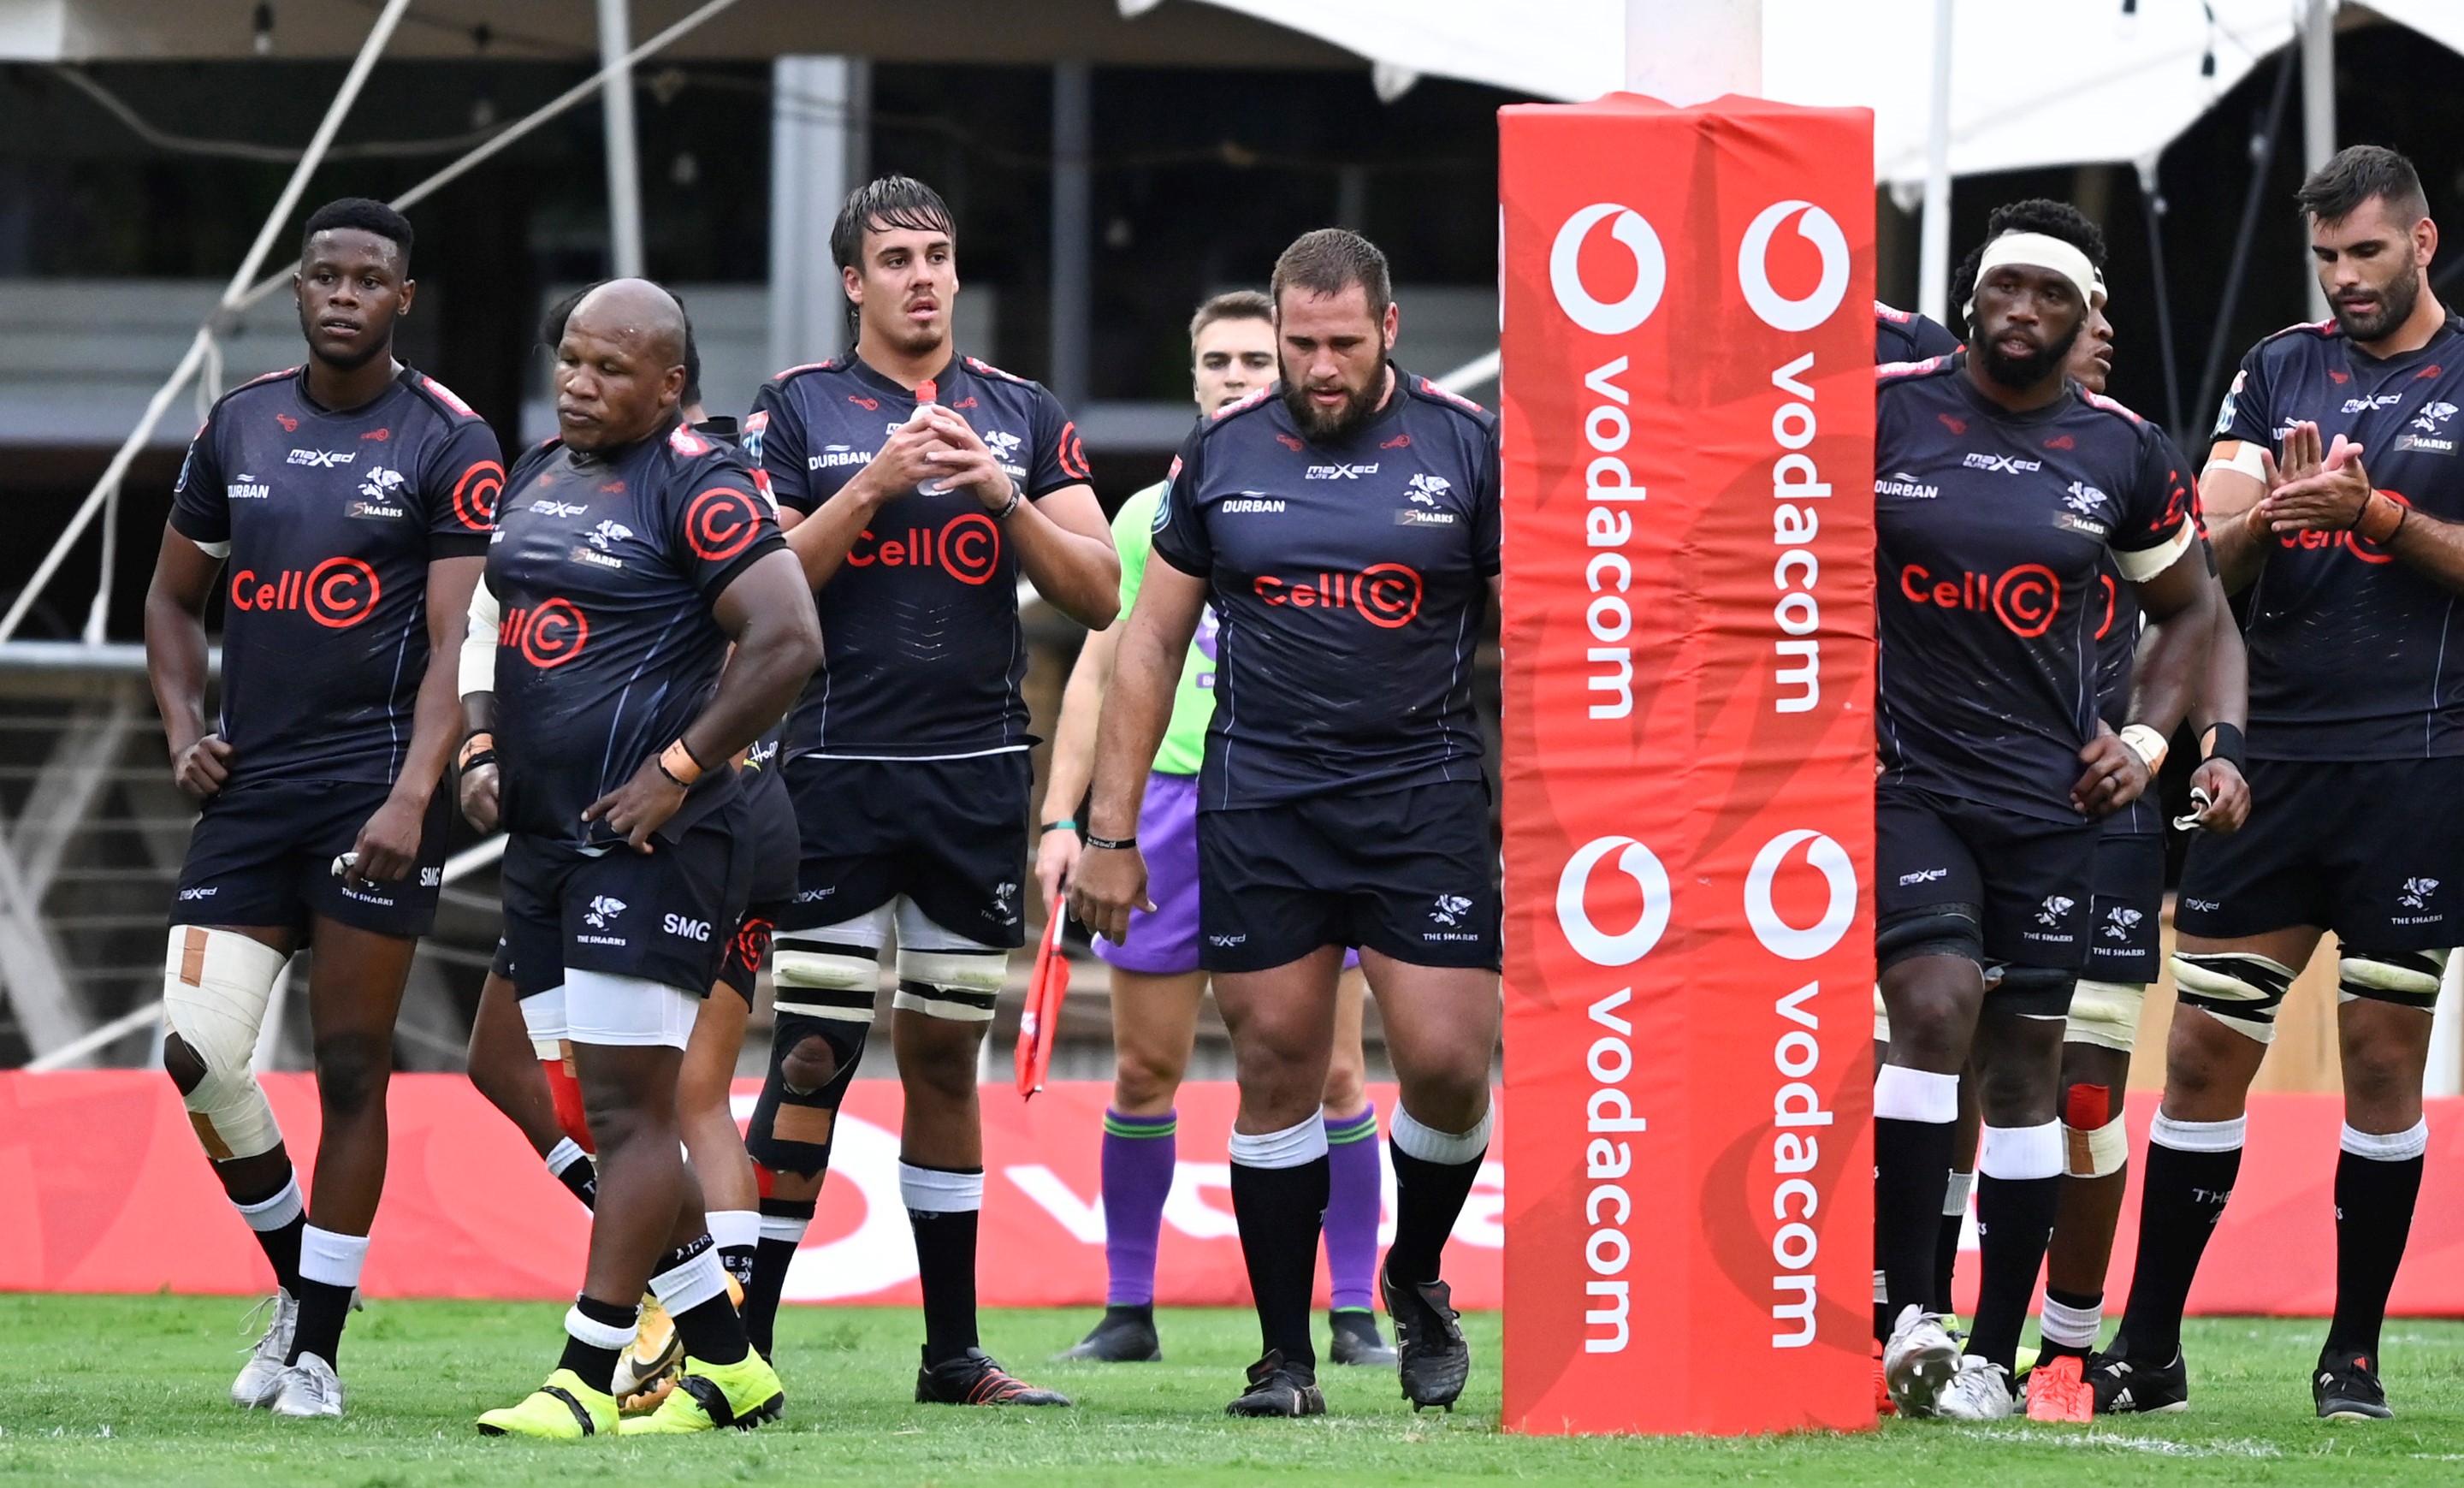 Sharks team under the posts during the United Rugby Championship 2021/22 match between the Sharks and Stormers held at Kings Park in Durban on 29 January 2021 ©Gerhard Duraan/BackpagePix